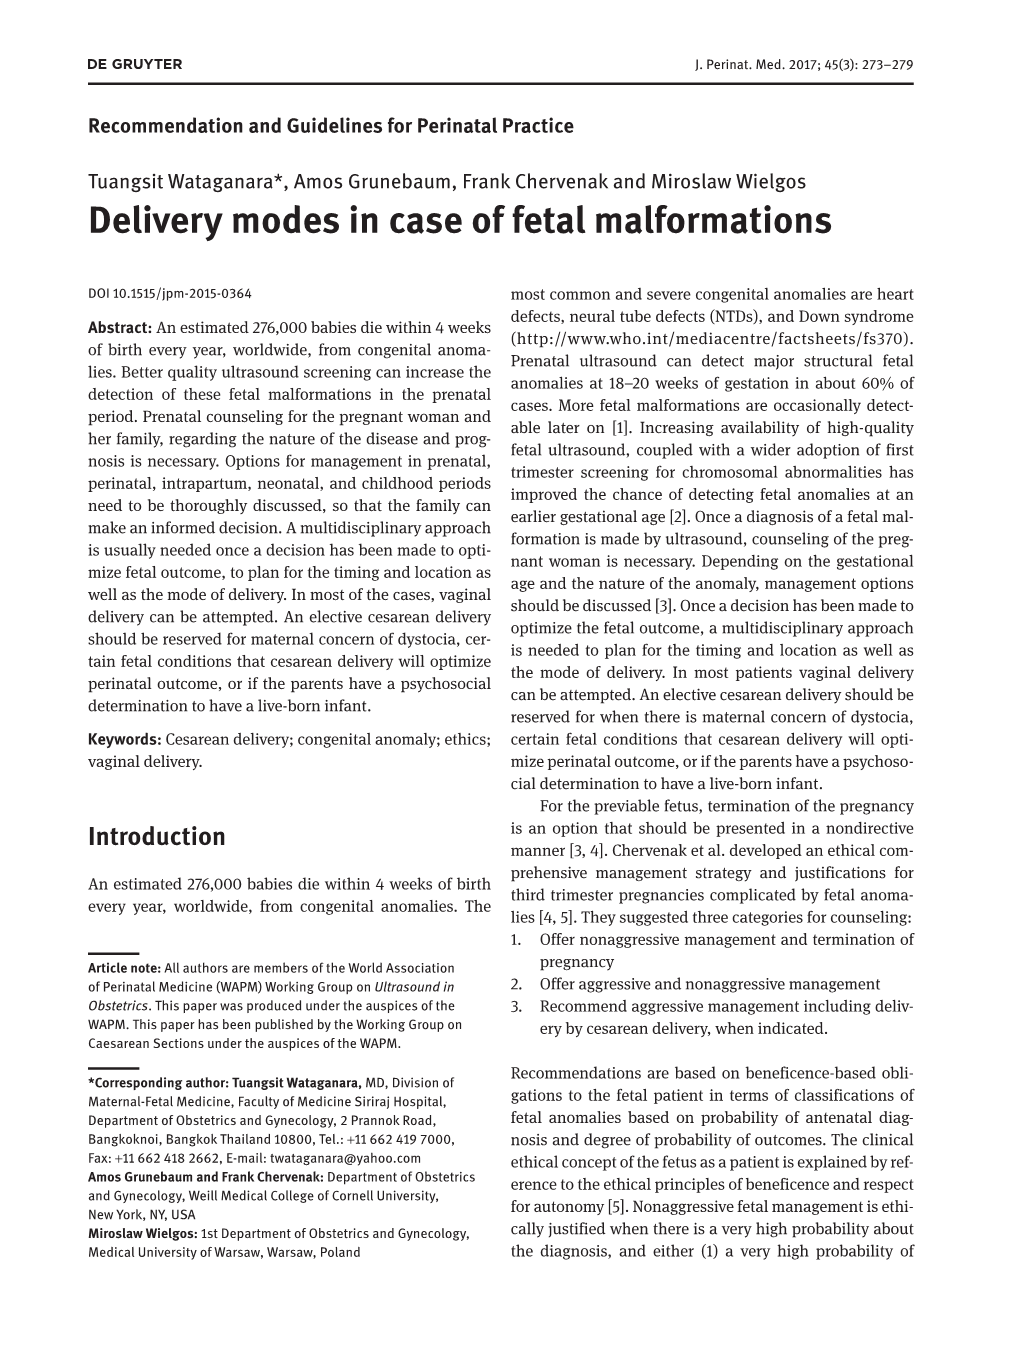 Delivery Modes in Case of Fetal Malformations